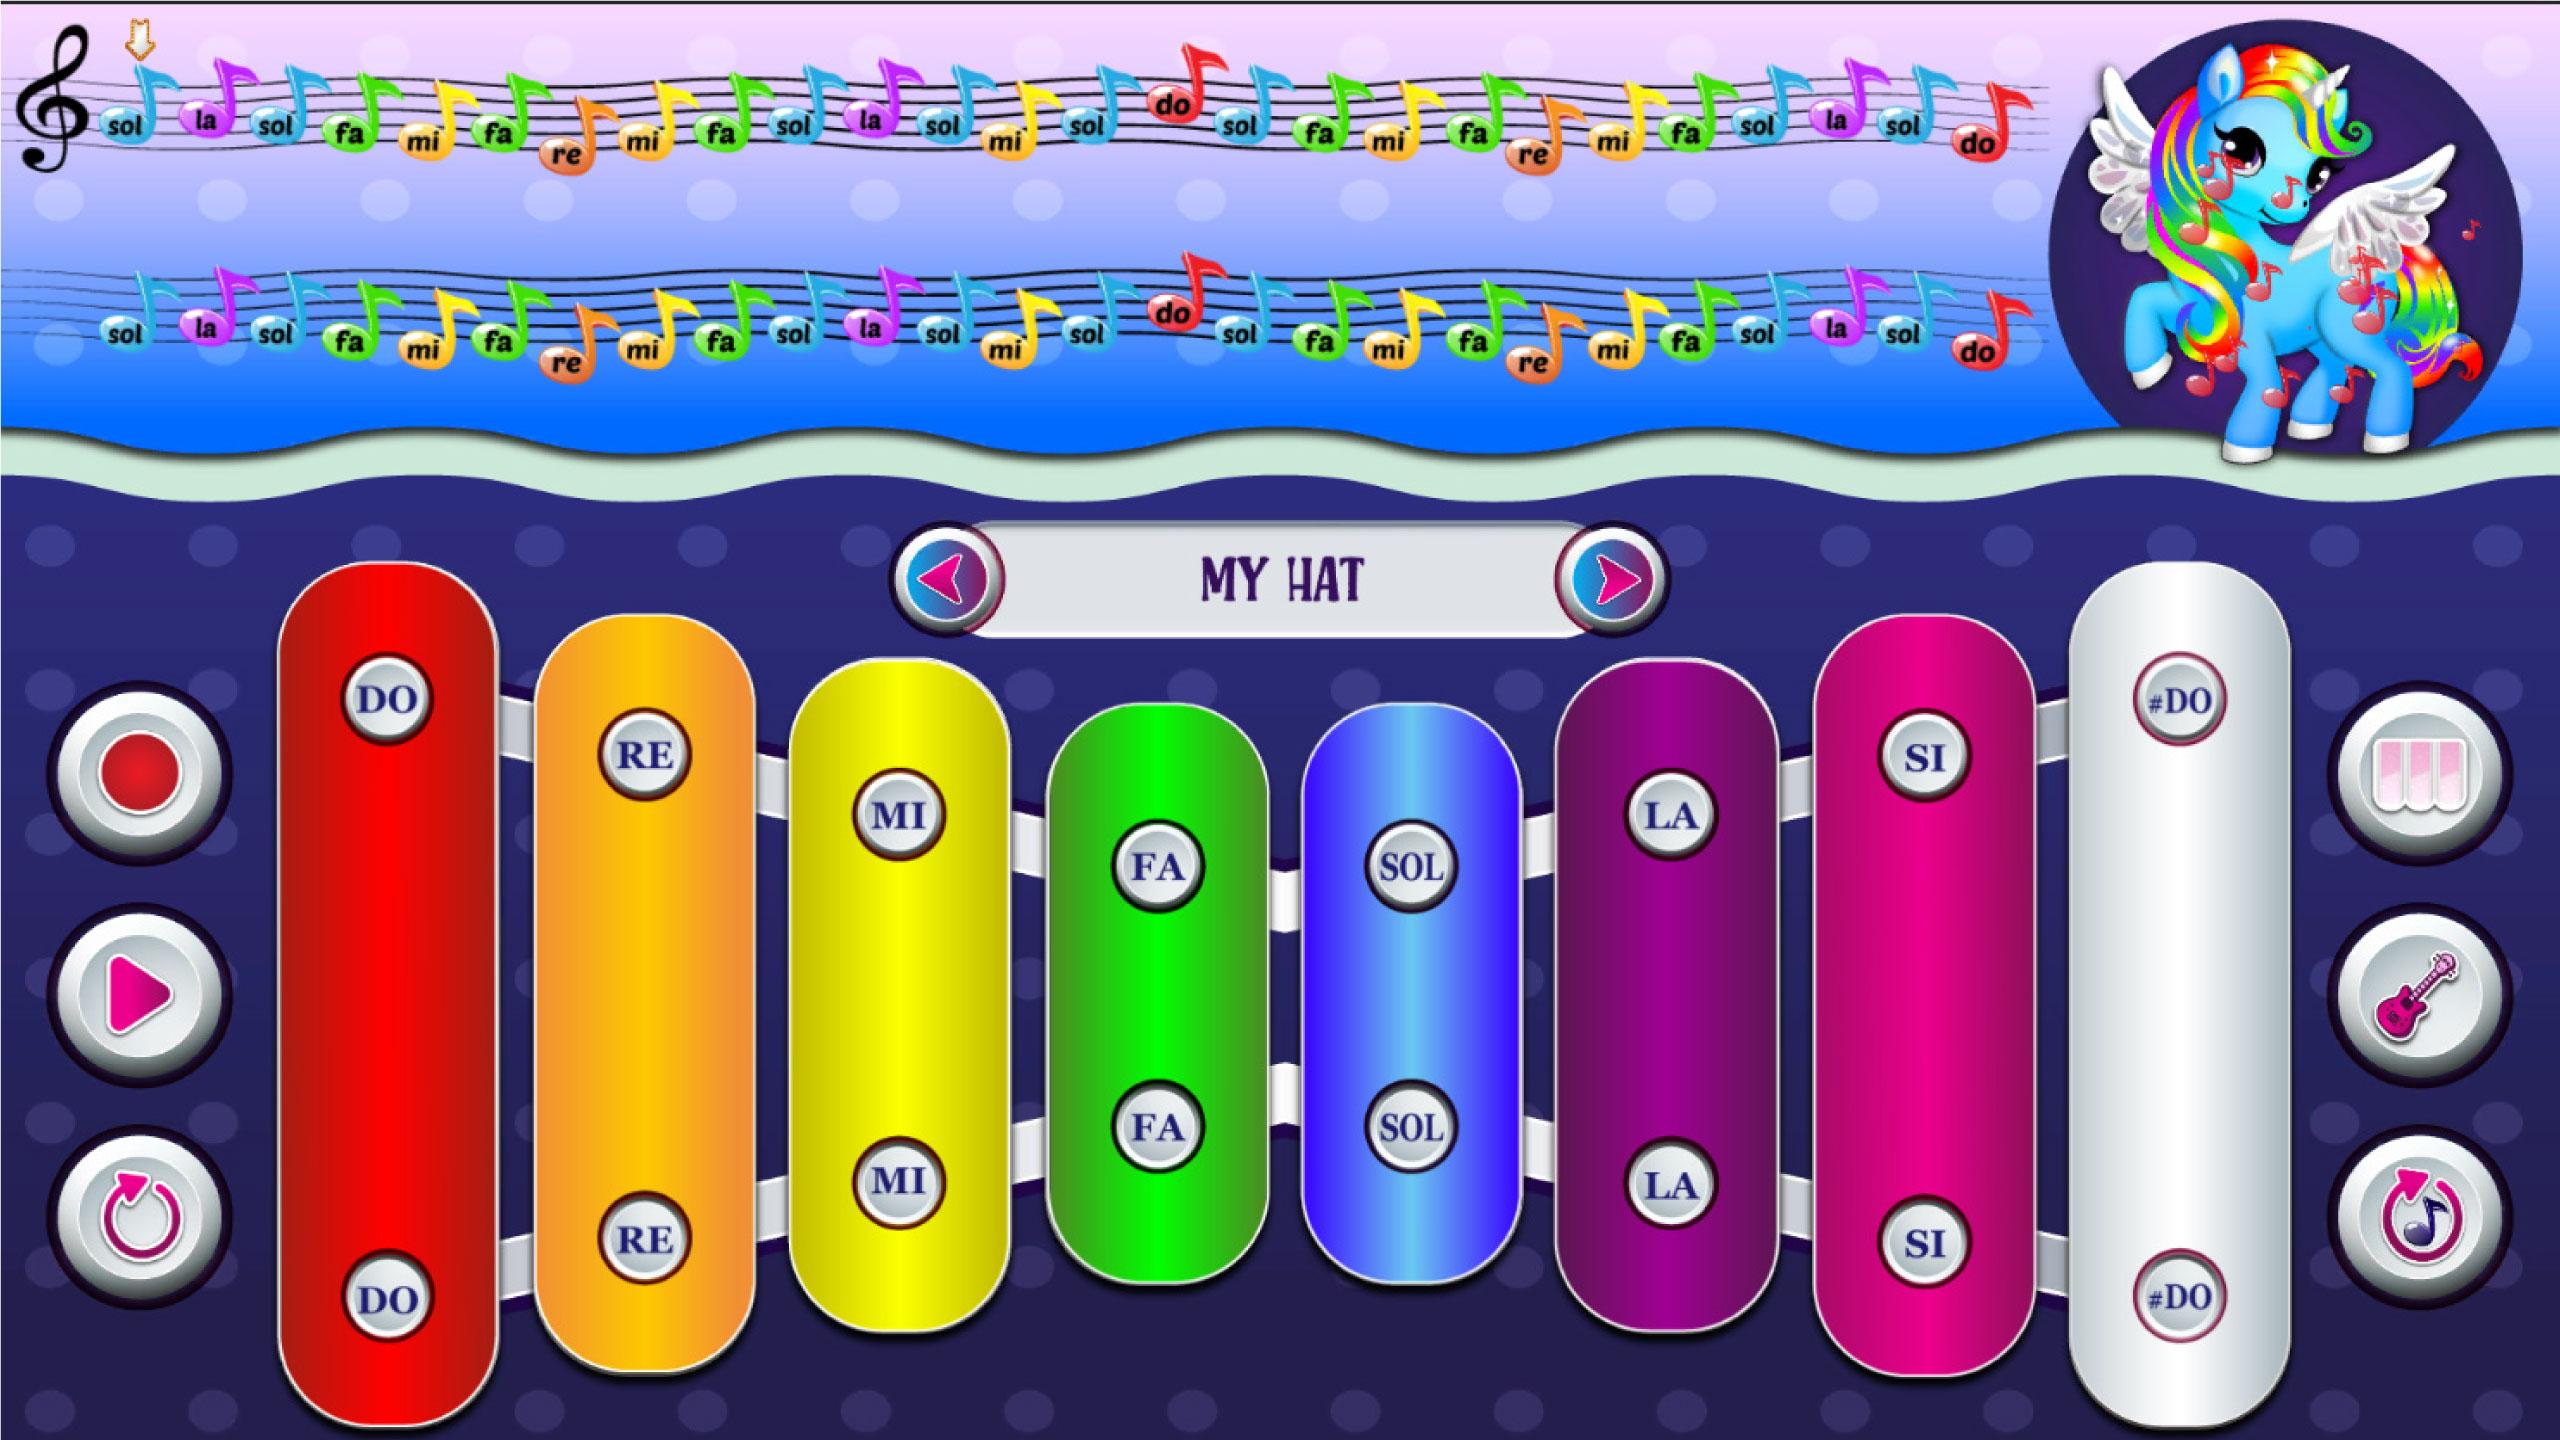 My Colorful Litle Pony Instrument - Piano 2.0 Screenshot 11